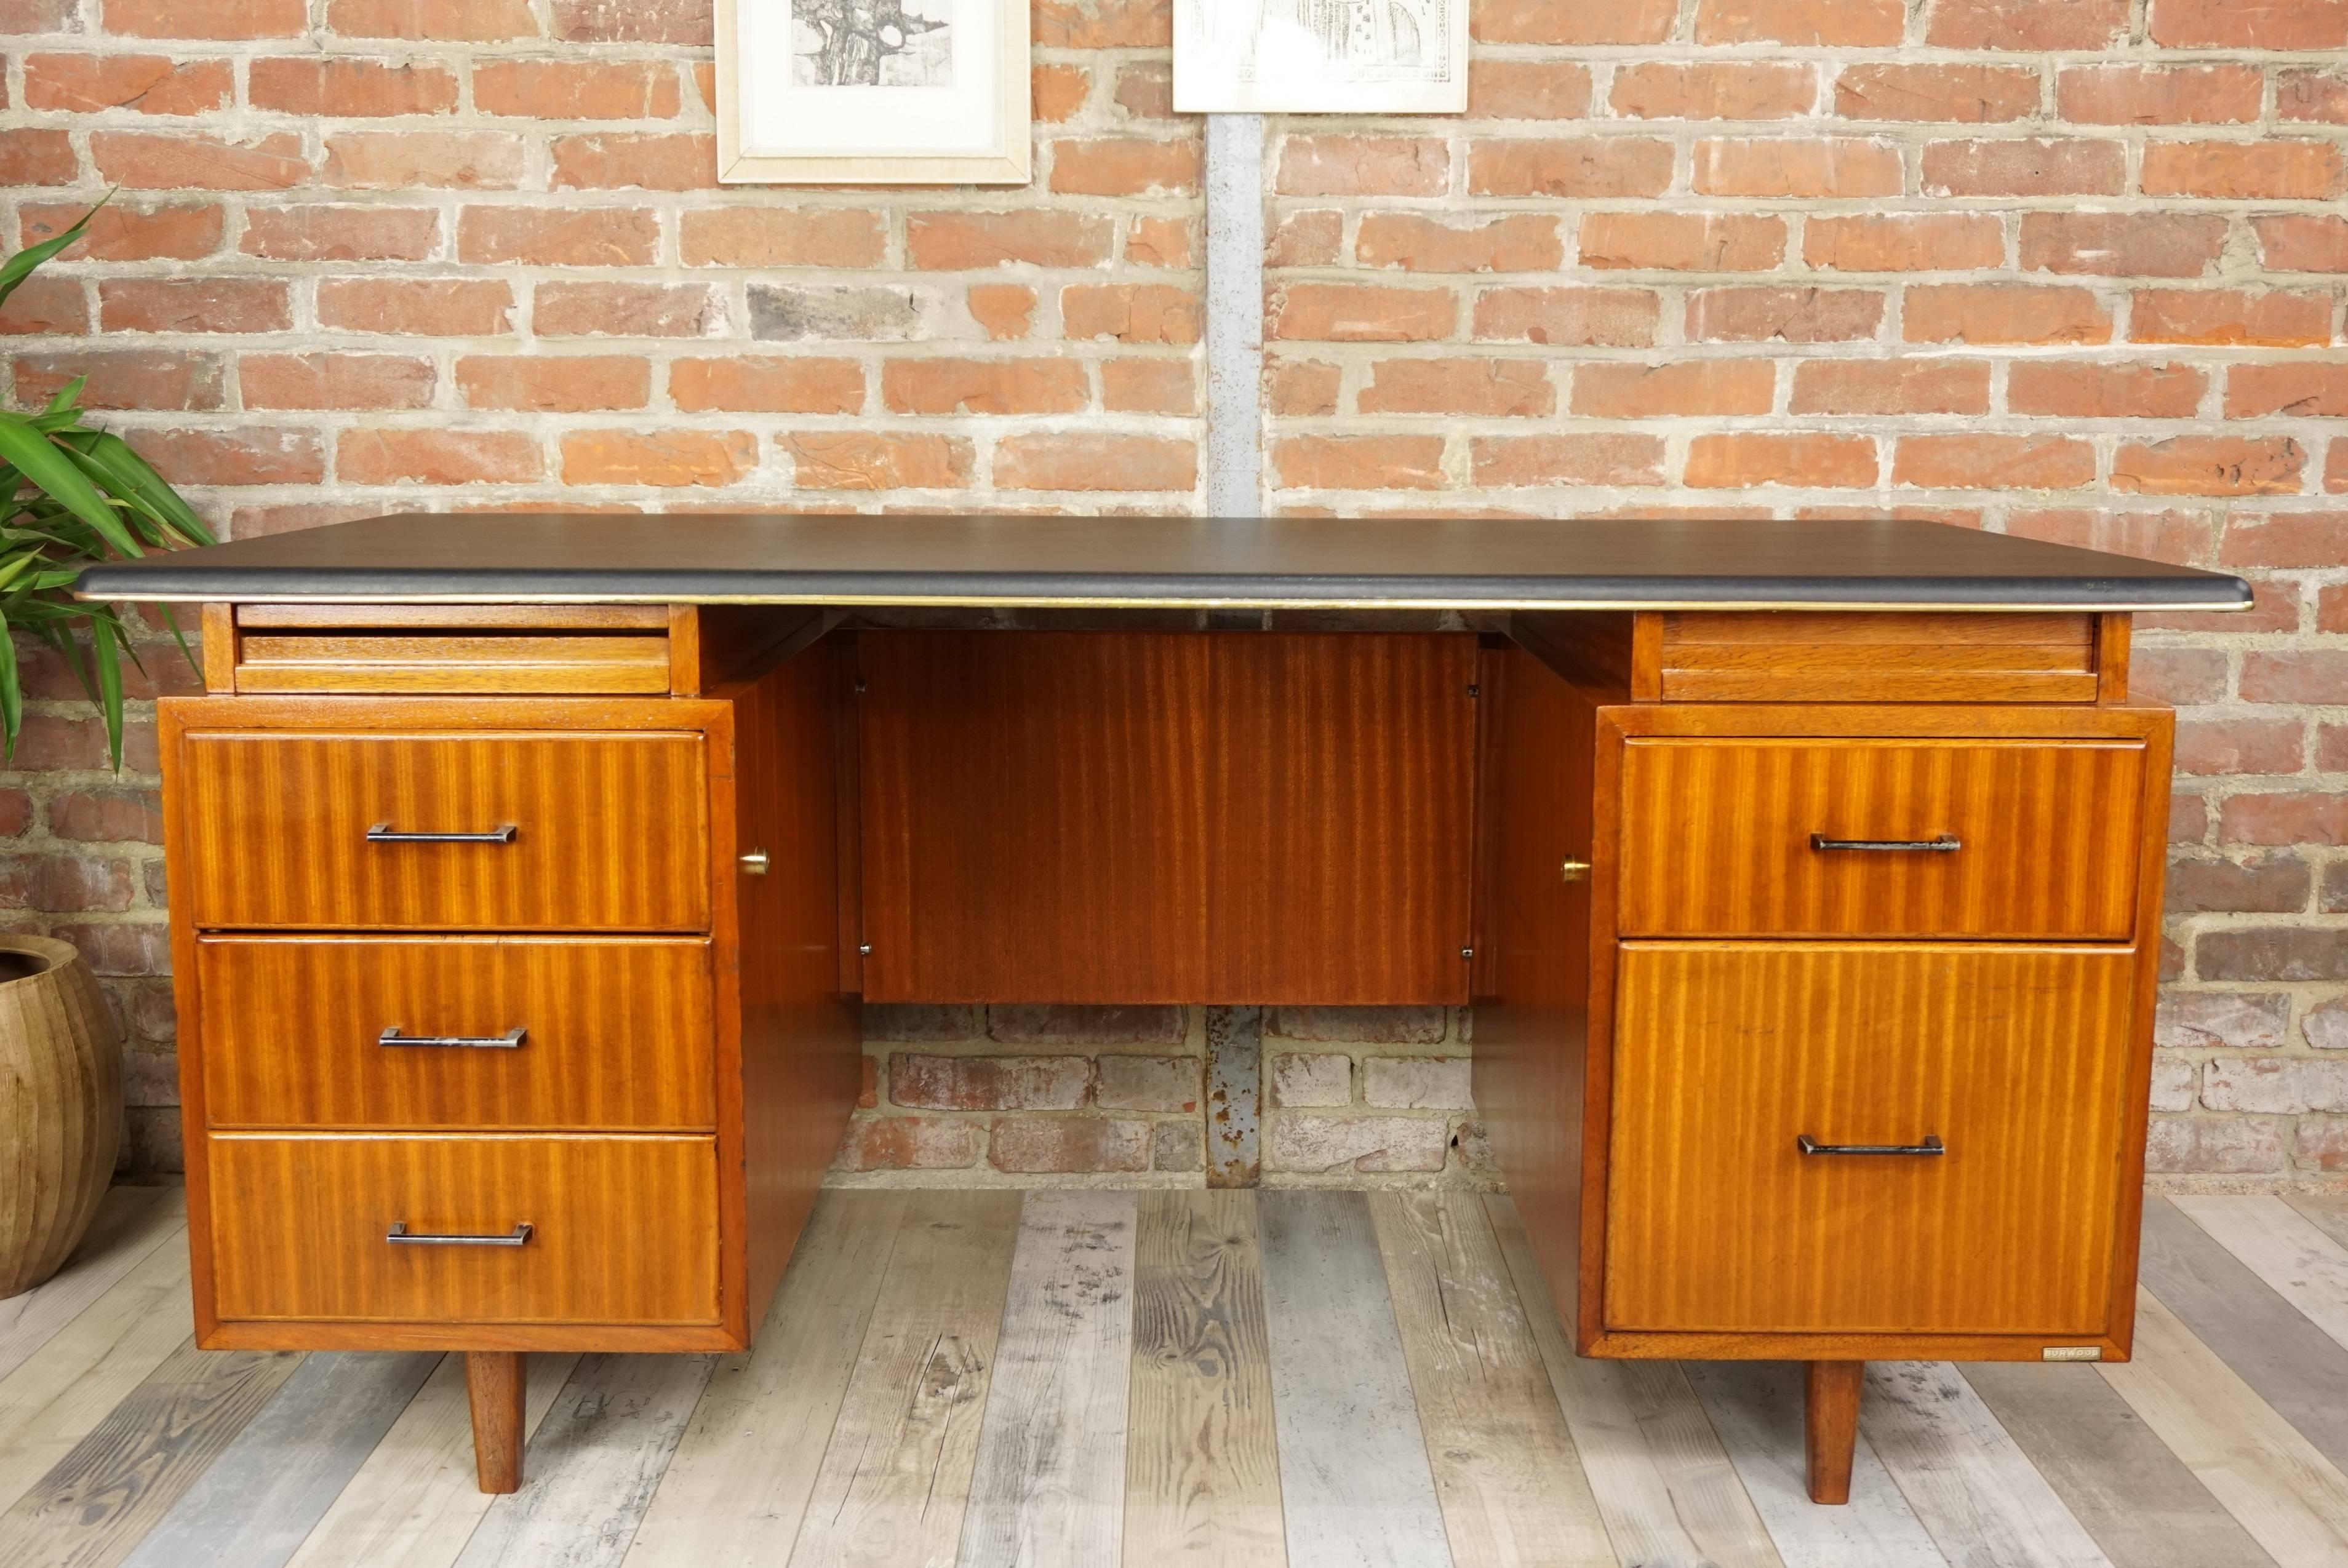 Executive desk design of the late 1950s burwood brand (construction of furniture by Waendendries in 1955 in the North Of France), robust and high quality composed of a wooden structure, double box including an ingenious file drawer, handles in black